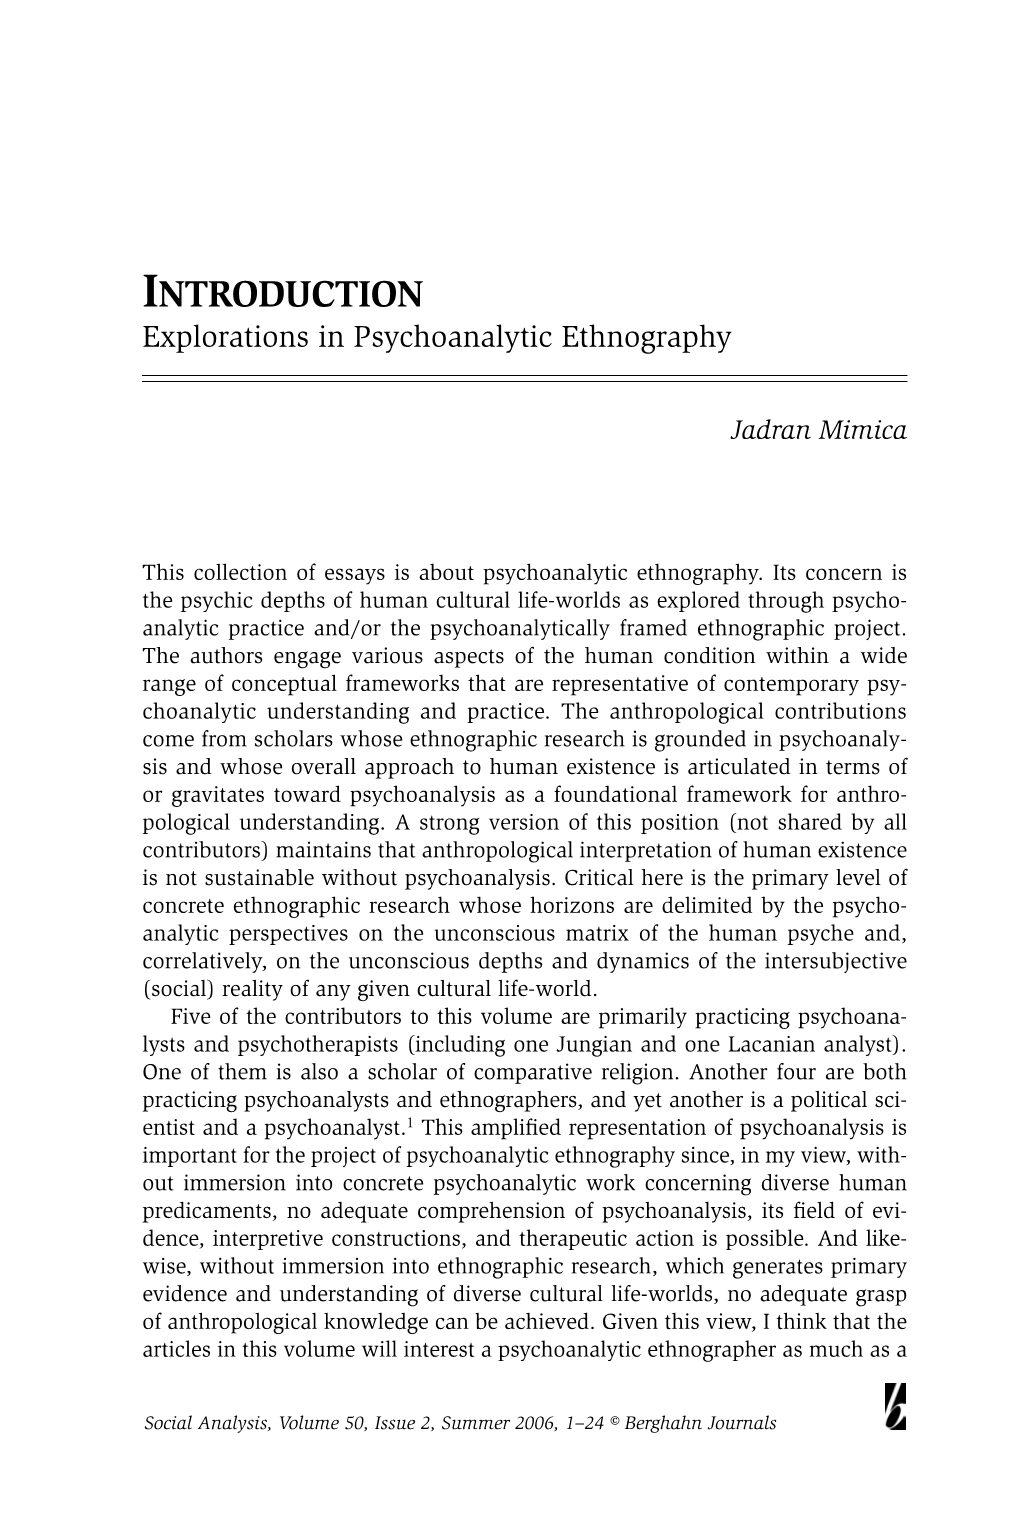 INTRODUCTION Explorations in Psychoanalytic Ethnography